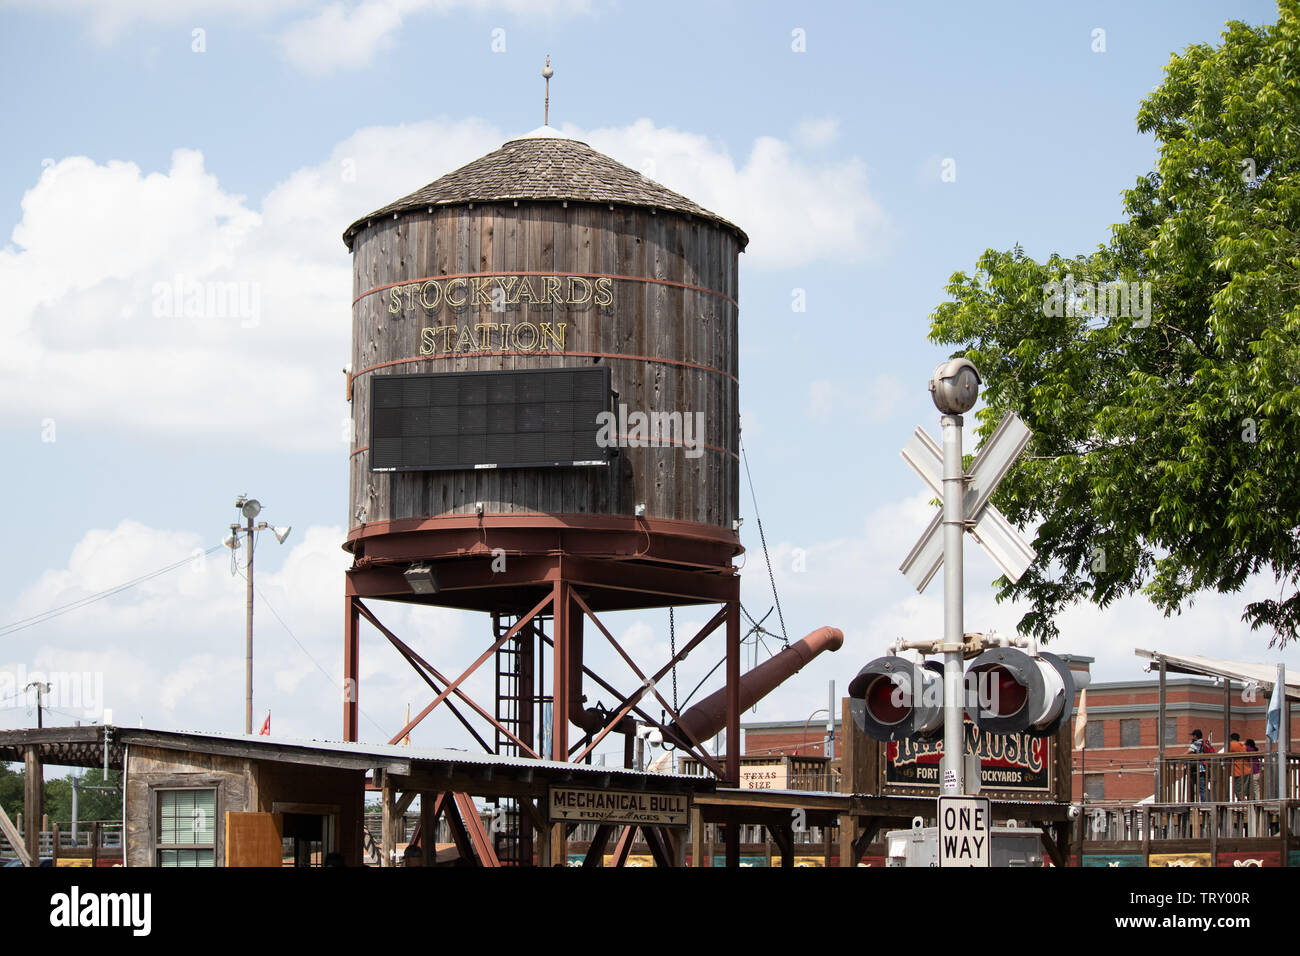 The Water Tower on Main Street, Fort Worth, part of the historic stockyard district. Stock Photo